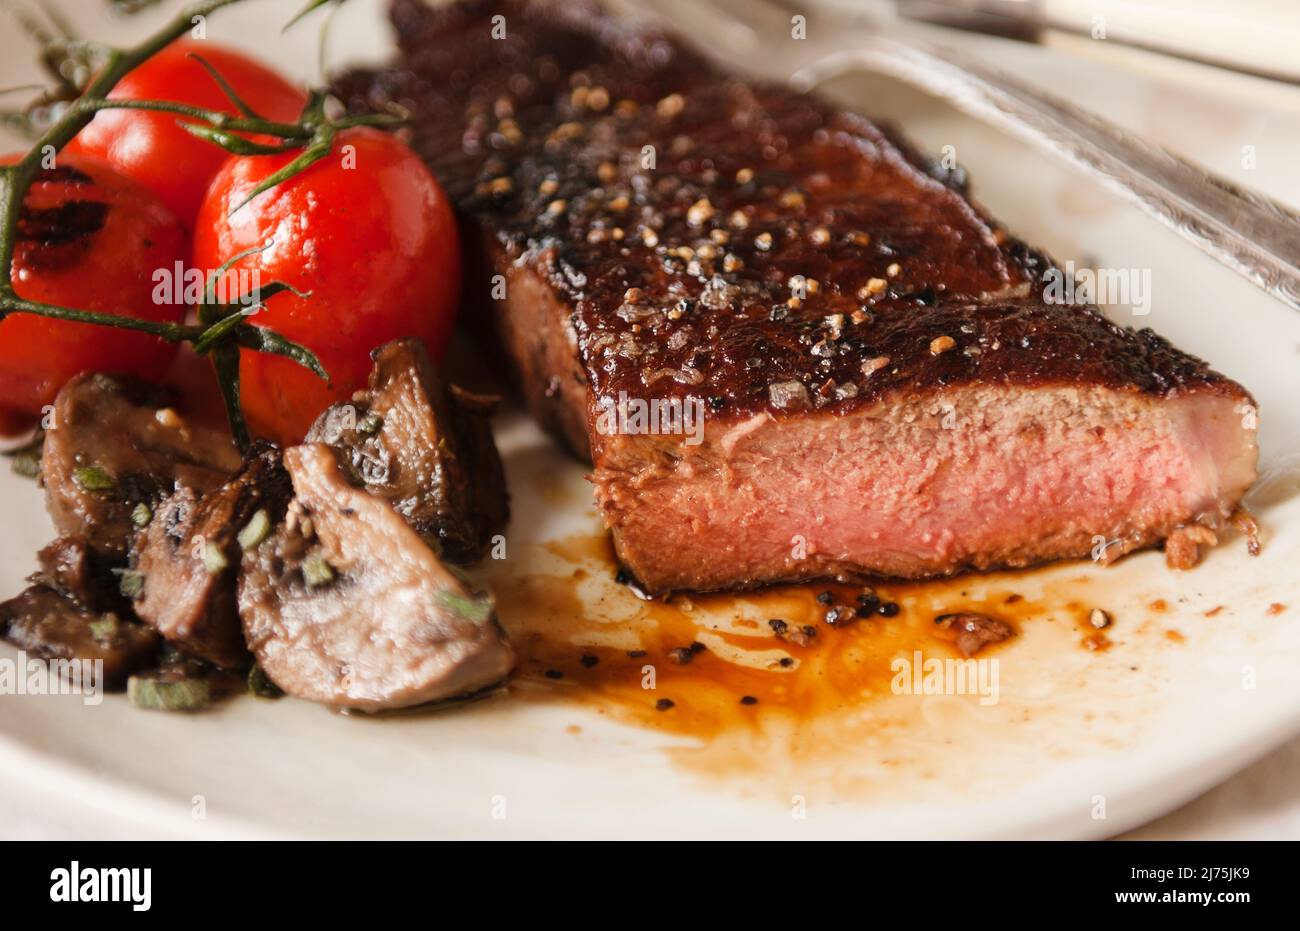 New York strip steak with roasted mushrooms and tomatoes Stock Photo